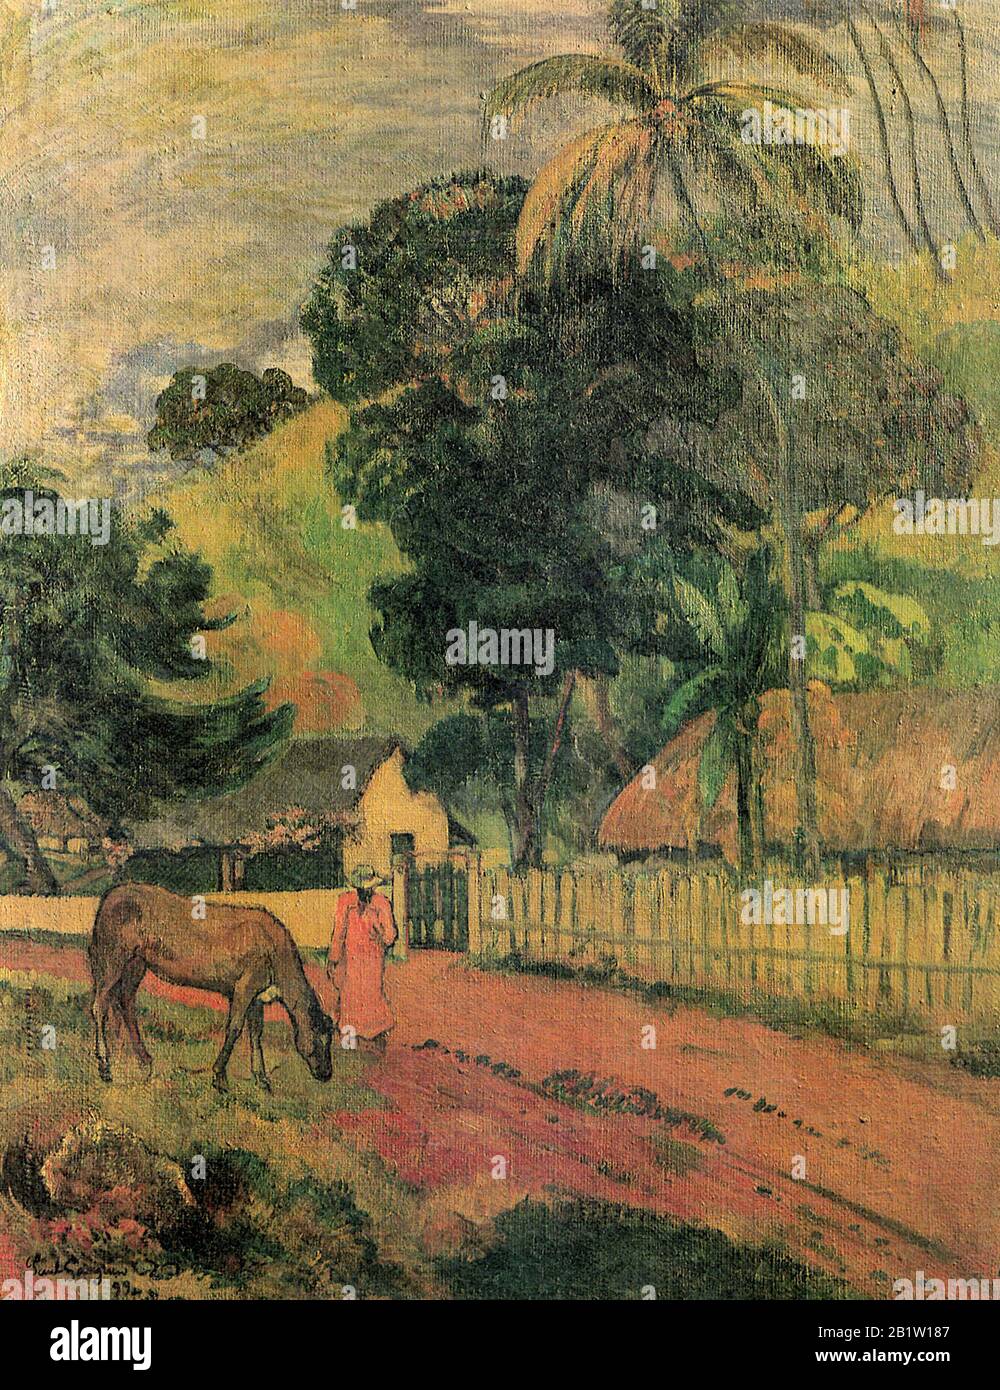 The Horse in the Road (Le cheval sur le chemin) (1899) 19th Century Painting by Paul Gauguin - Very high resolution and quality image Stock Photo